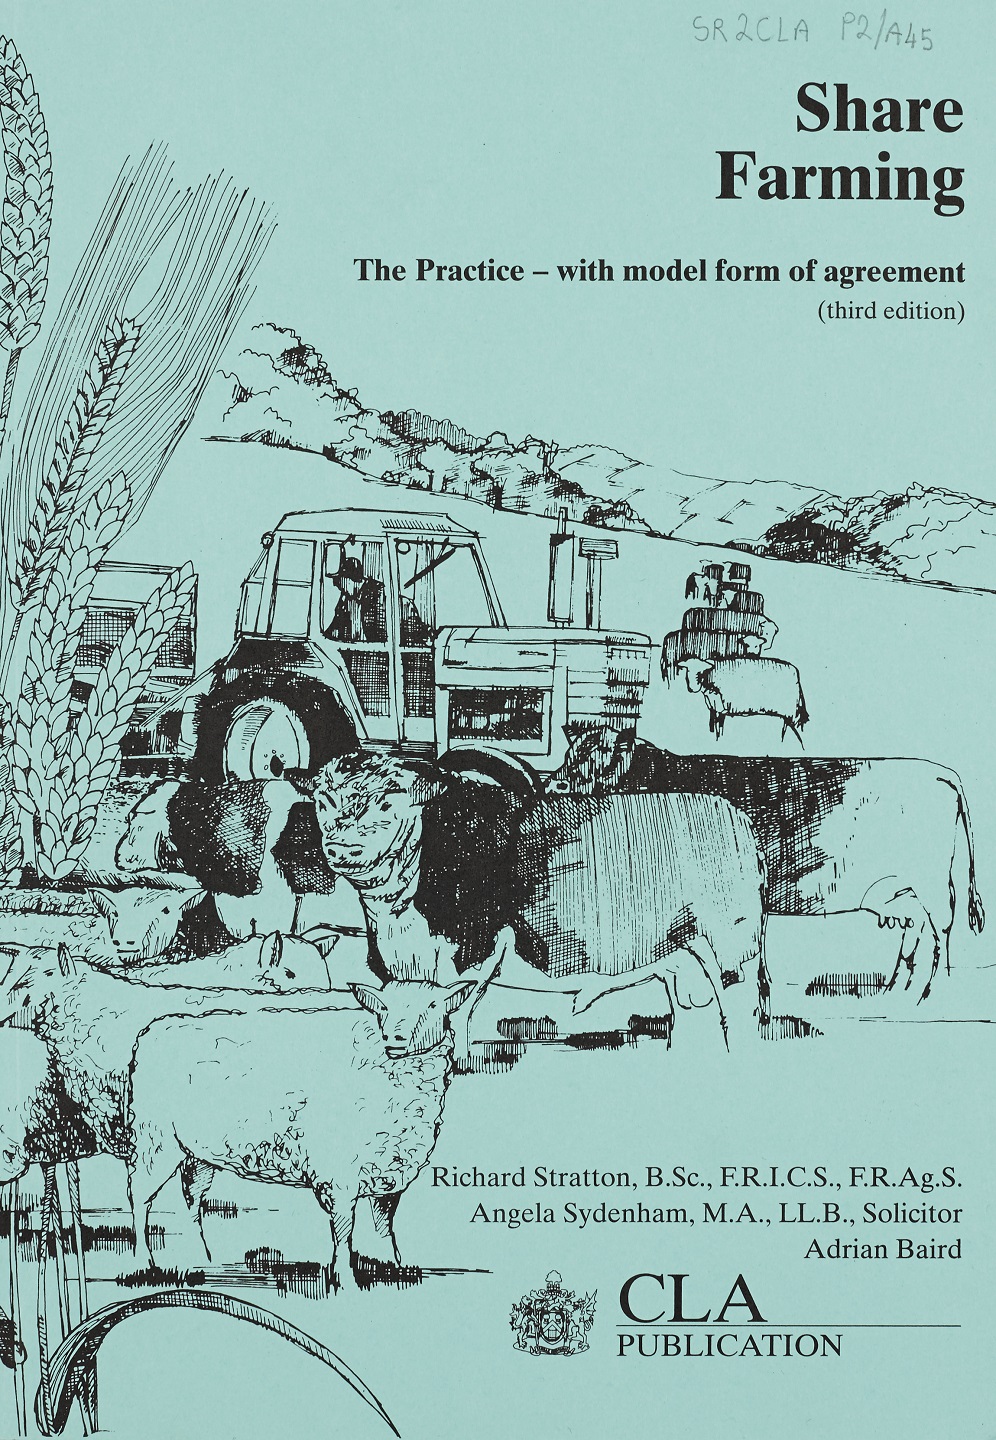 Pamphlet on Share Farming - dated 1992